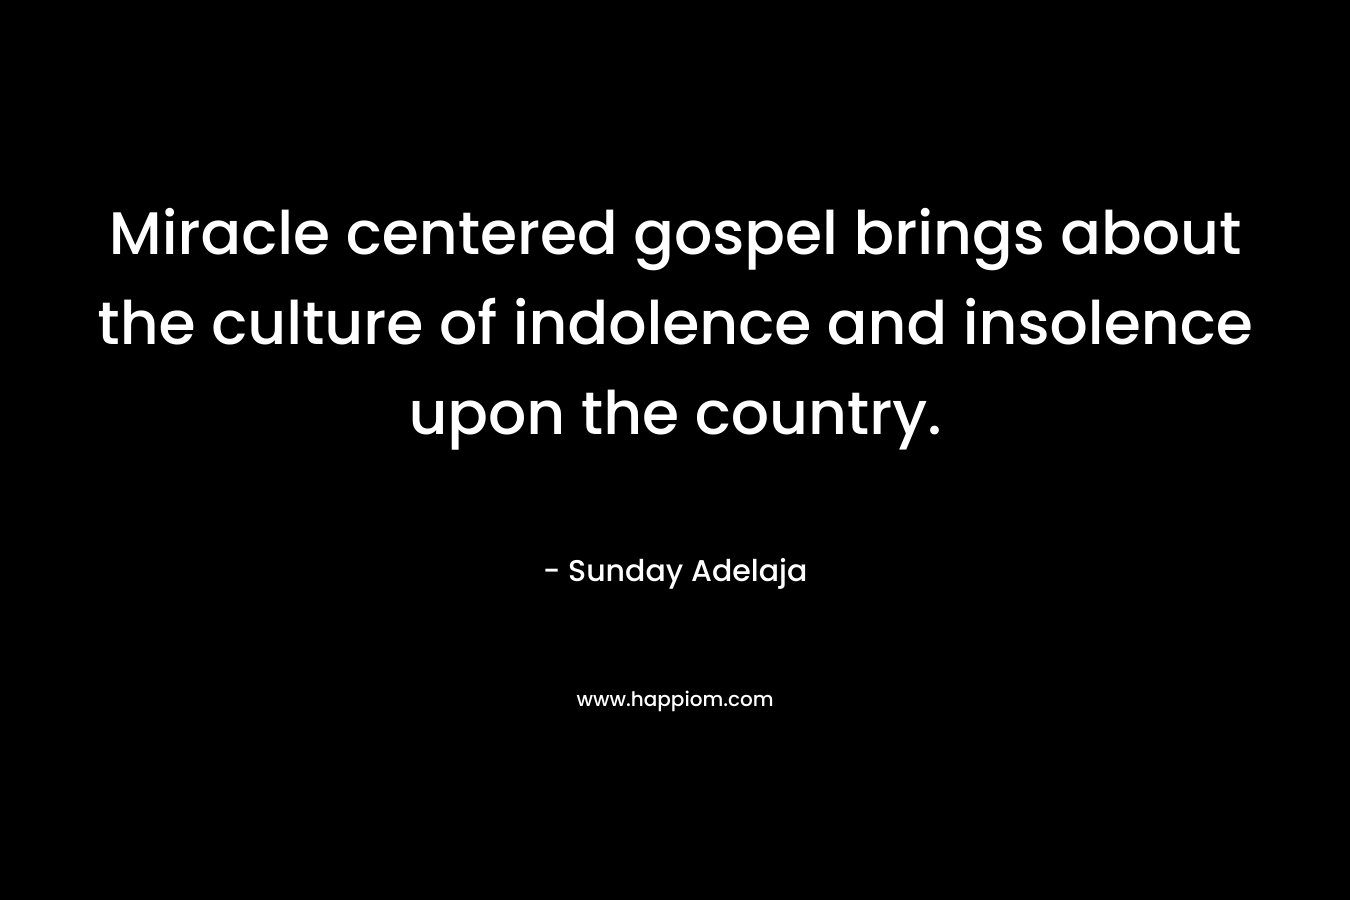 Miracle centered gospel brings about the culture of indolence and insolence upon the country. – Sunday Adelaja